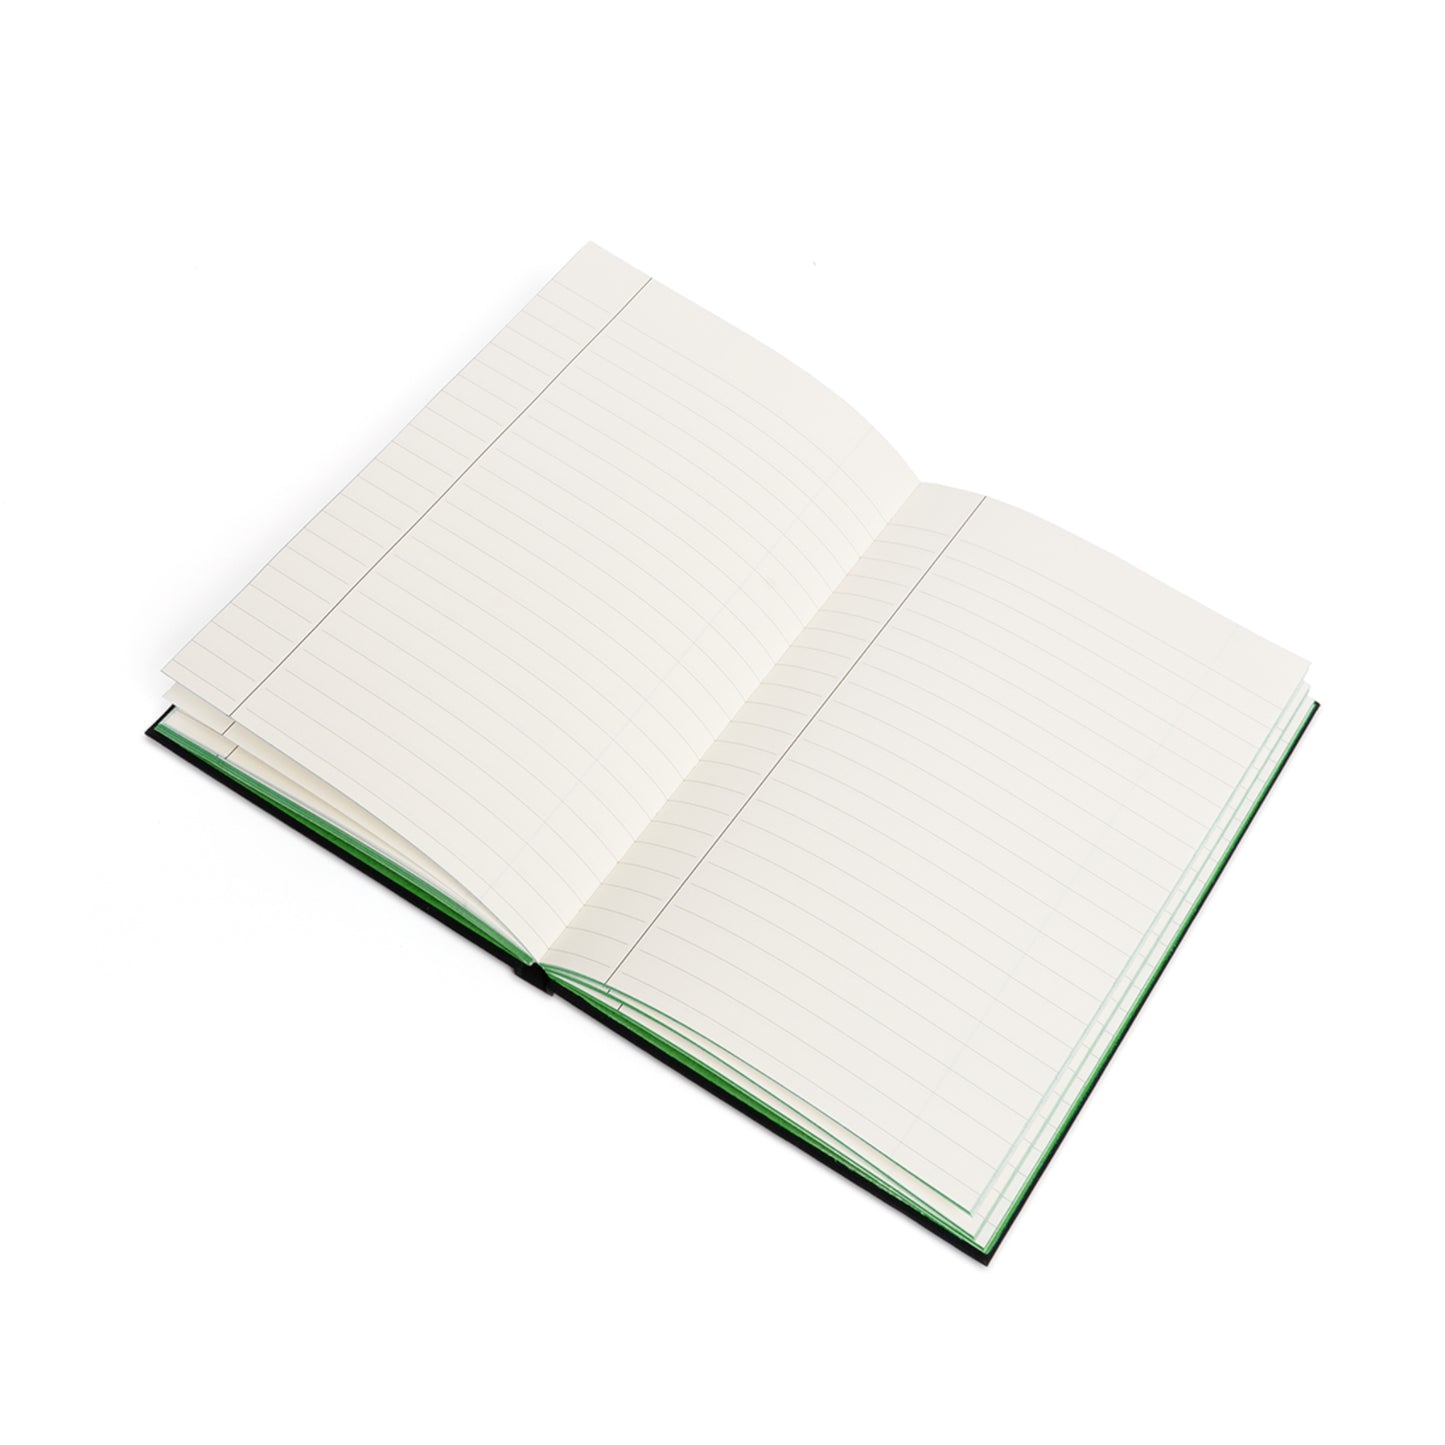 USA - Color Contrast Notebook - Ruled